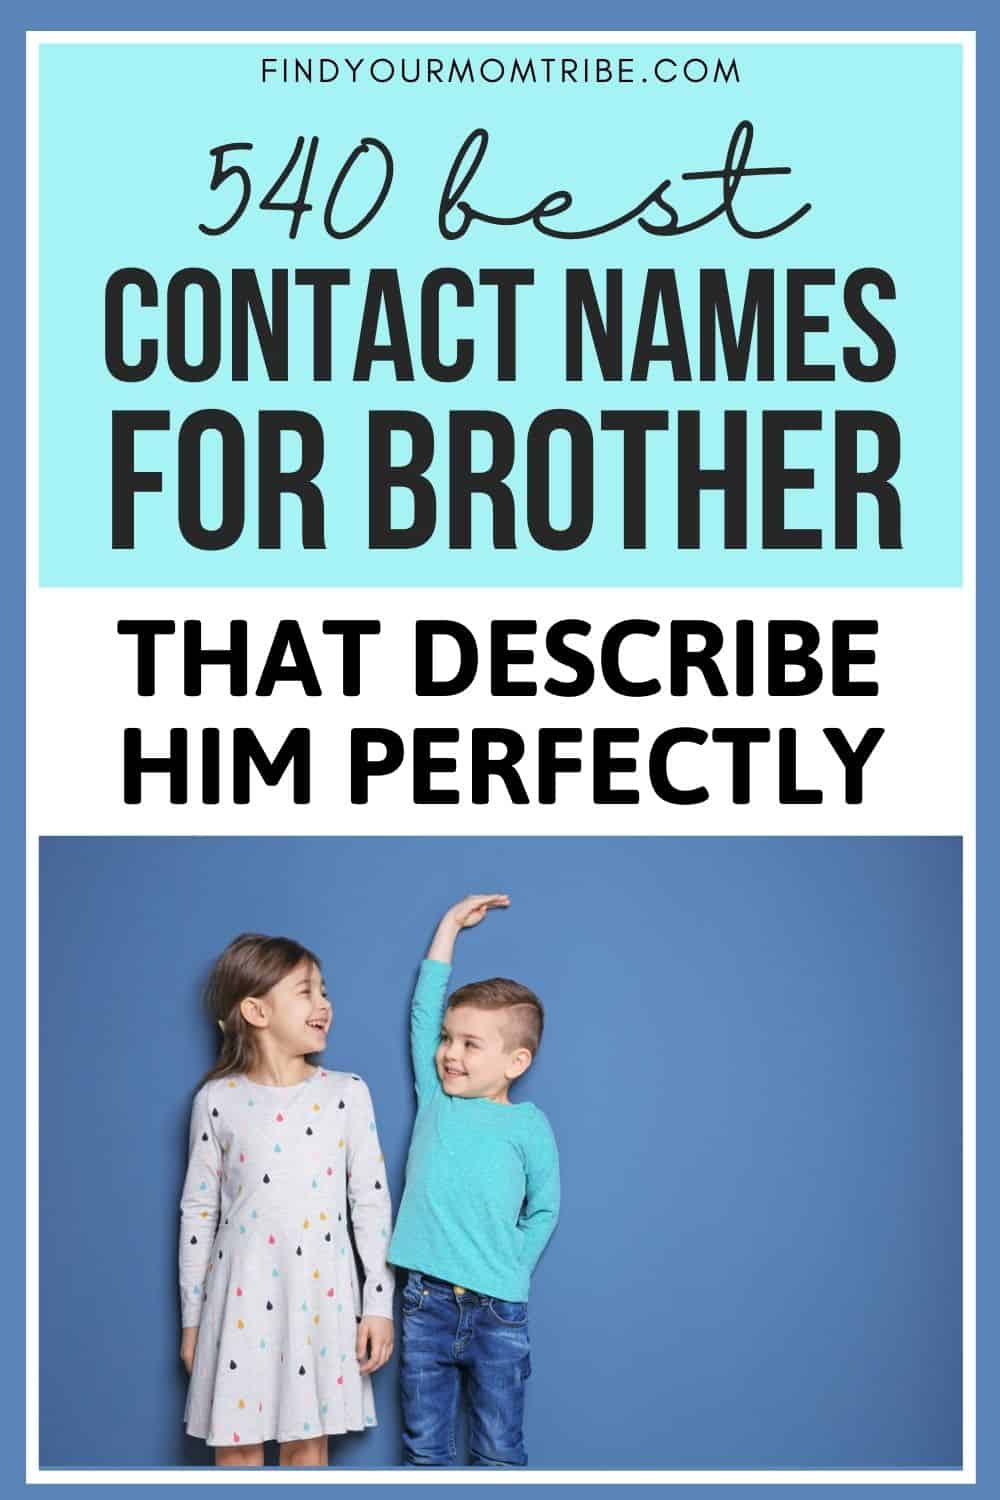 540 Best Contact Names For Brother That Describe Him Perfectly